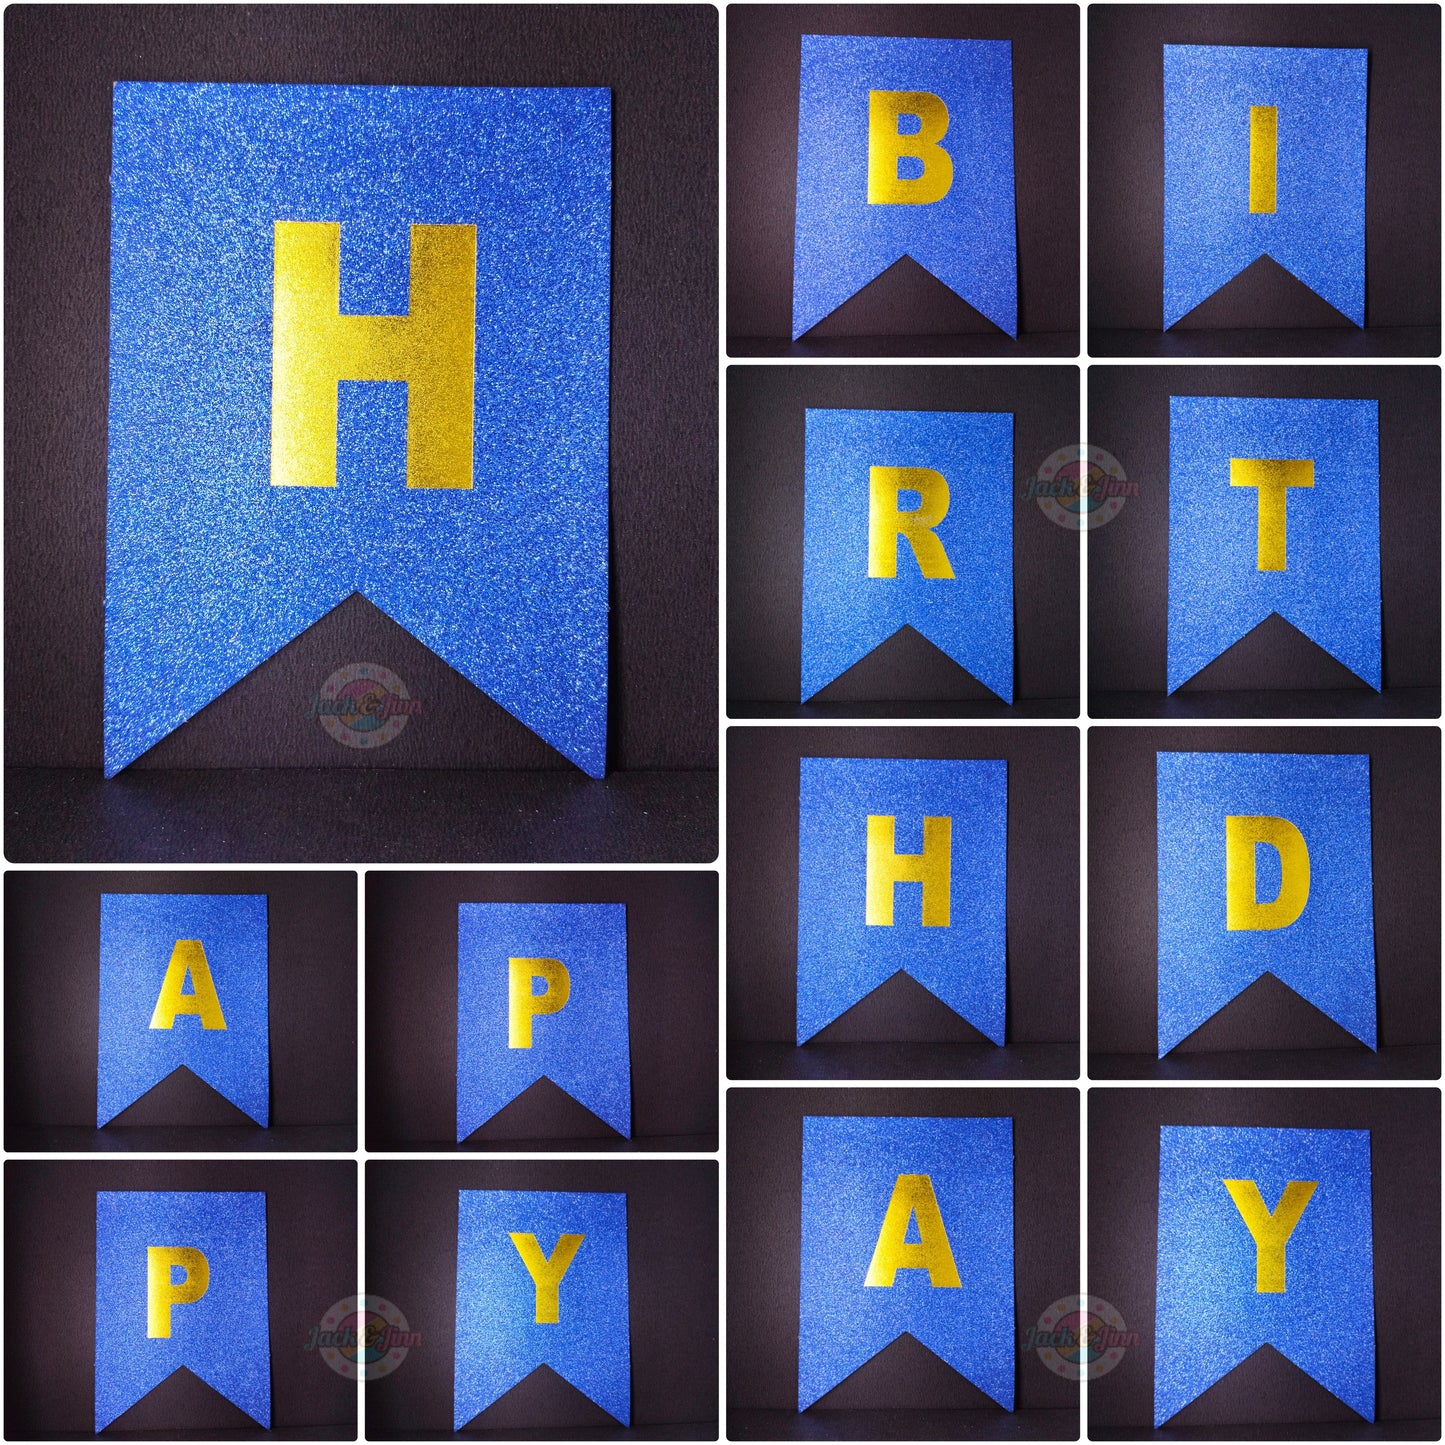 Birthday Banner Bunting - Glittery Dark Blue for Simple birthday decorations at Home